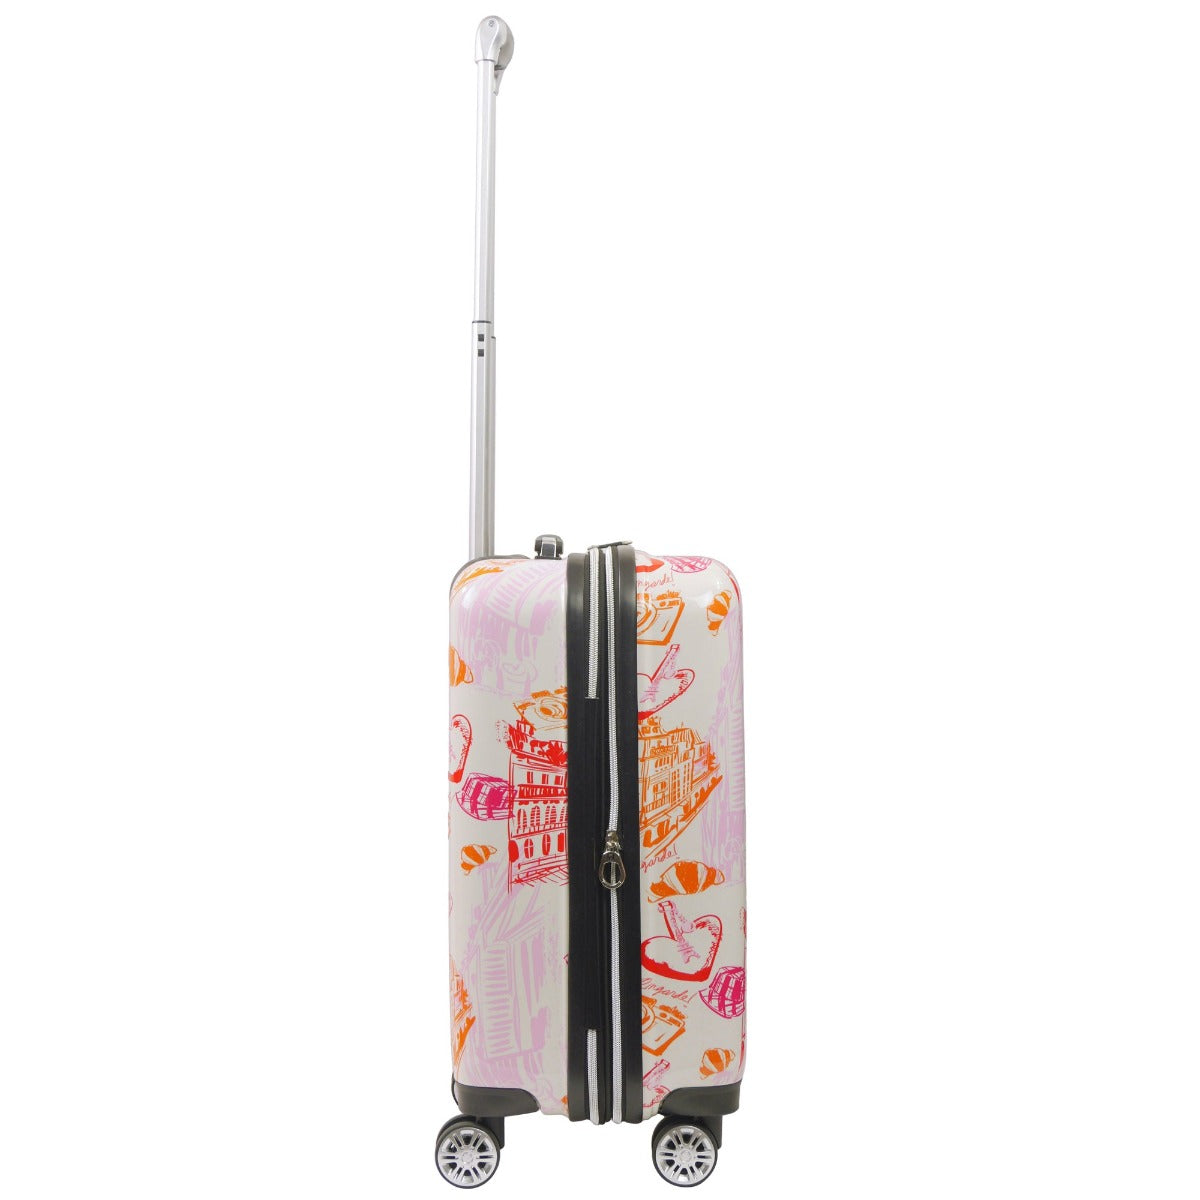 Ful Emily in Paris 21.5 inch hardside spinner expandable lightweight suitcase carry on luggage 